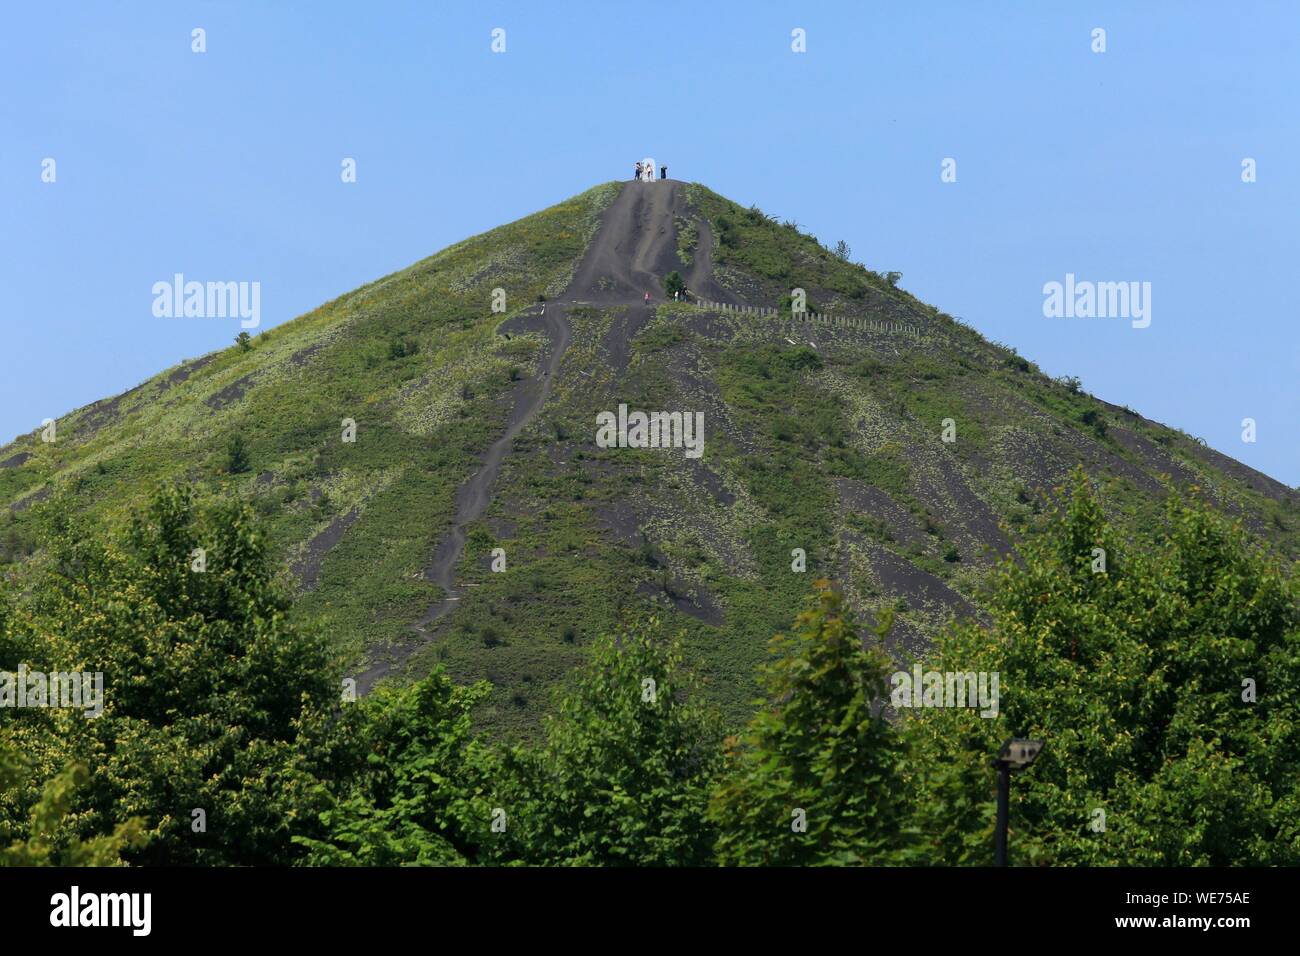 France, Pas de Calais, Loos en Gohelle, Mining Basin around Lens, site 11/19 of Loos en Gohelle. The Twin Heaps Here, Heap Summit No. 74 A. Mining Site Classified World Heritage of UNESCO Stock Photo